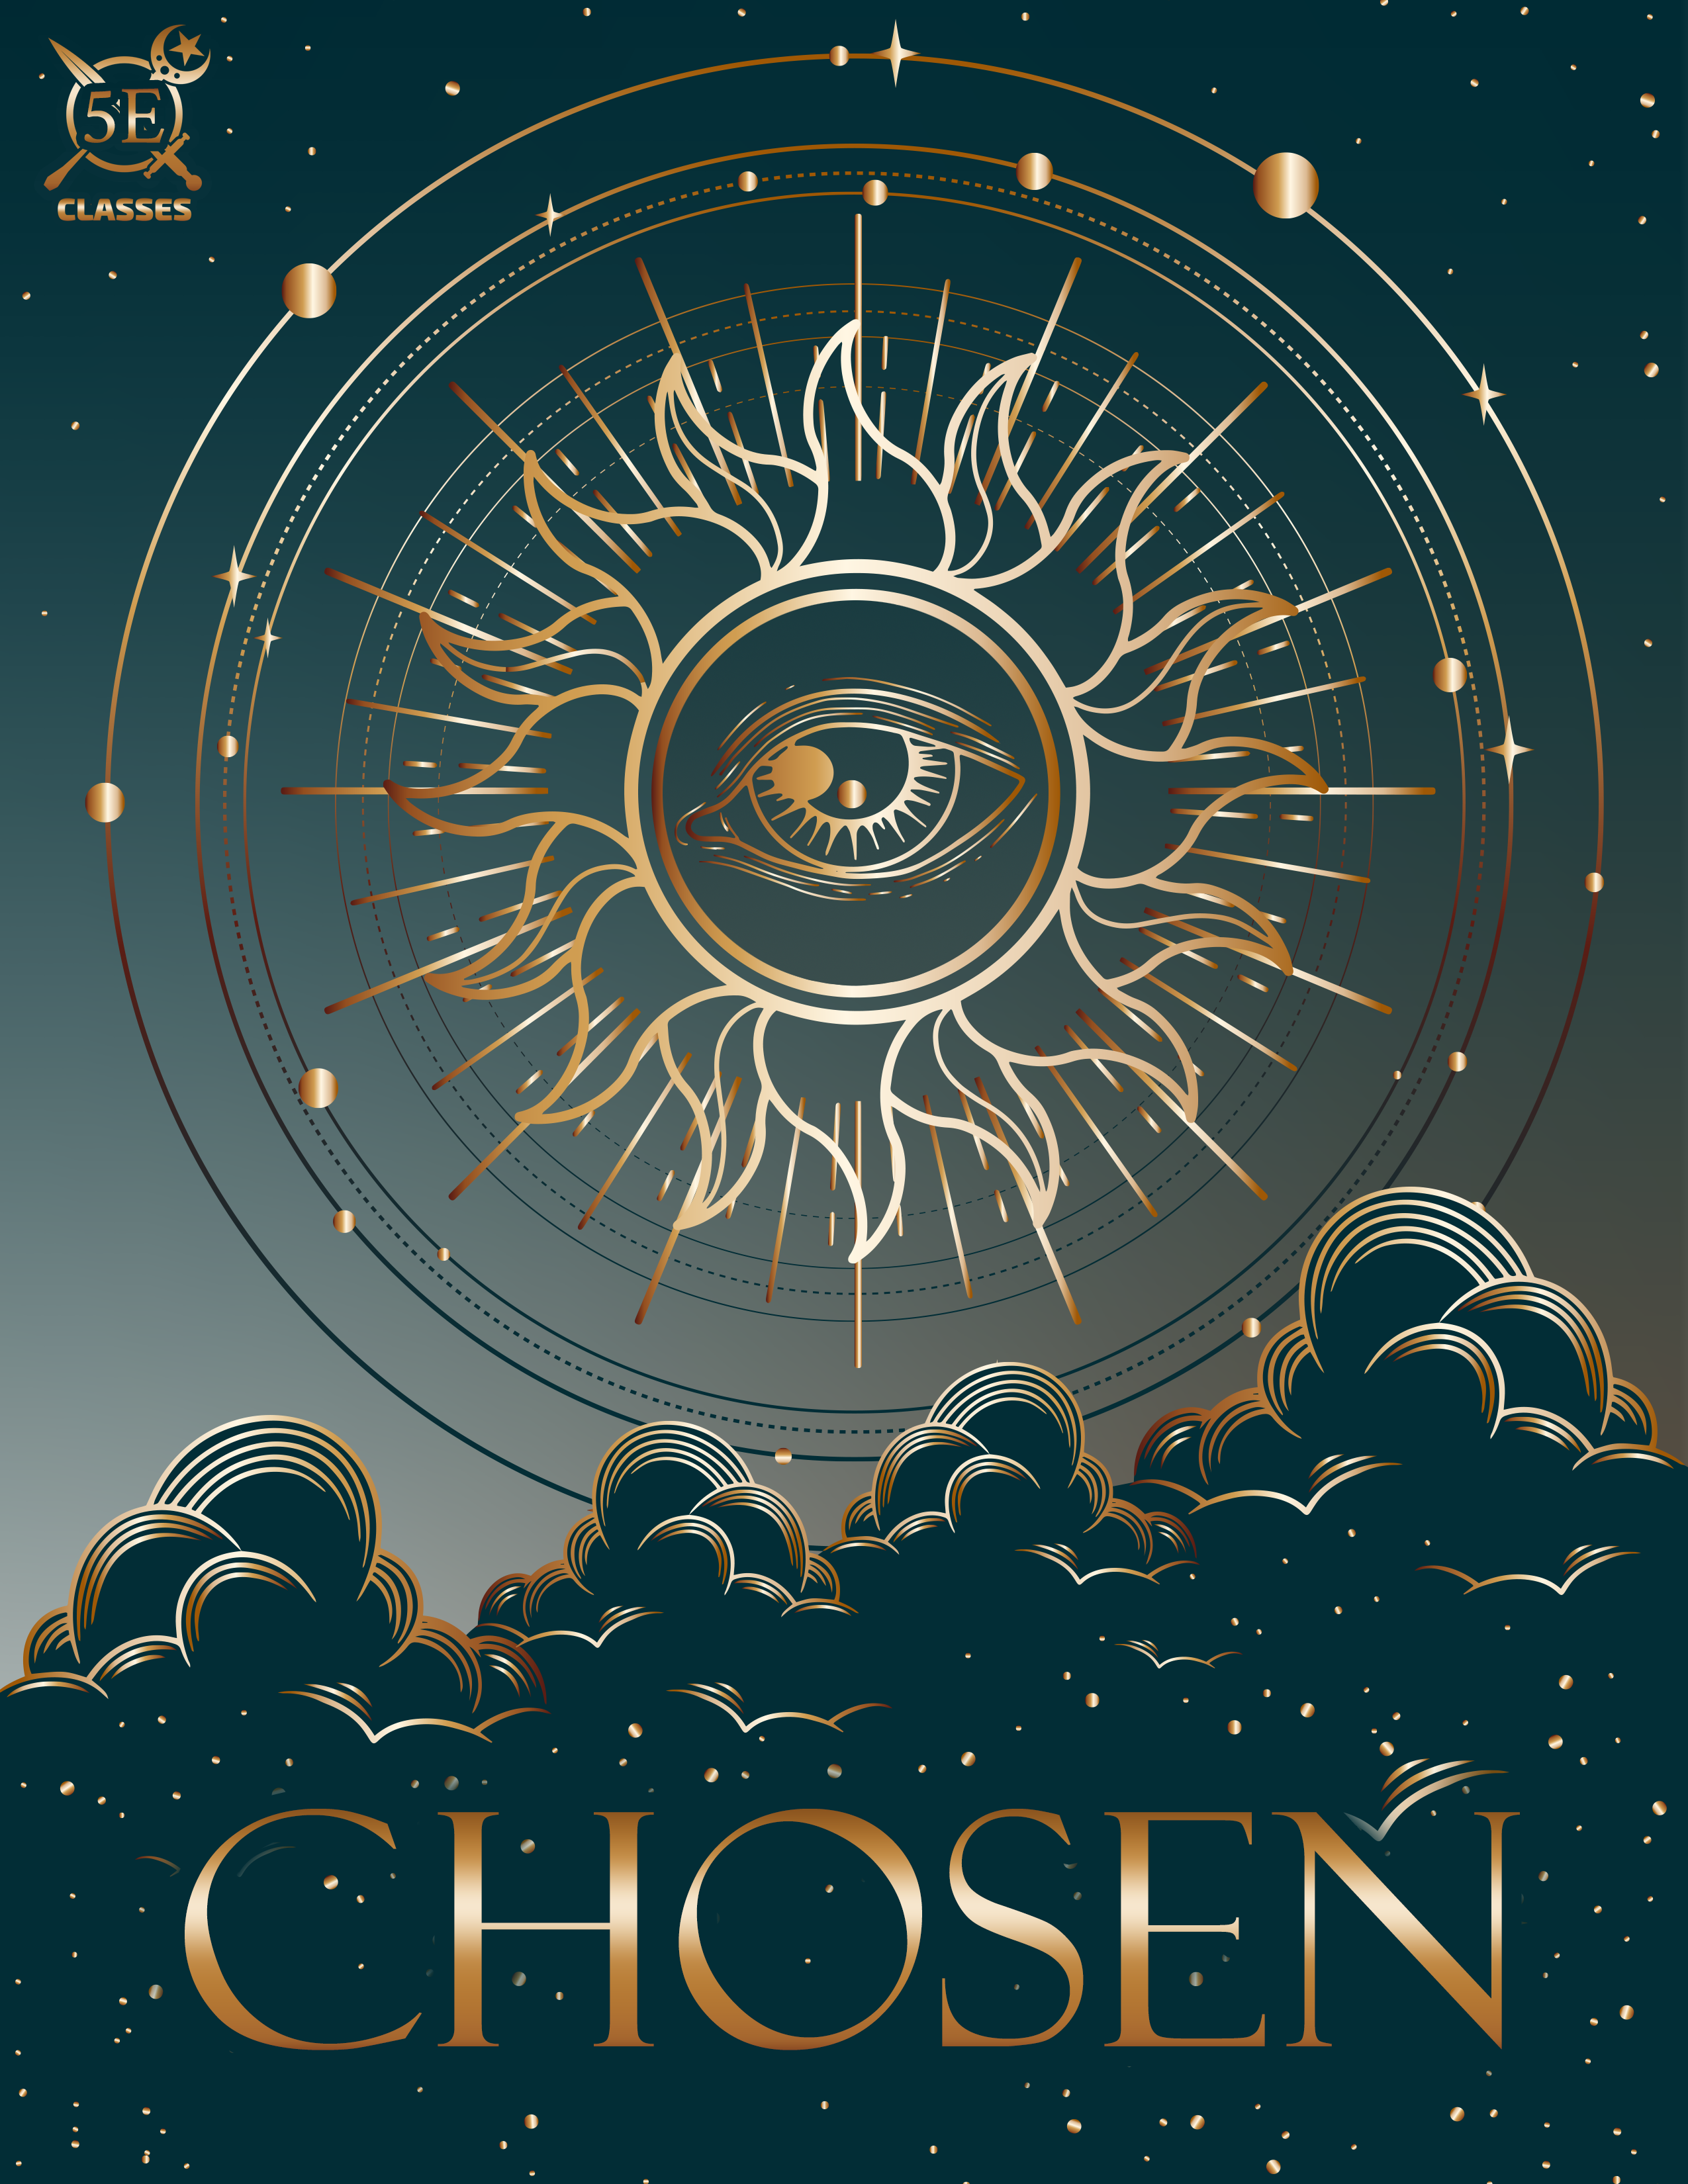 The Chosen. Chosen are extraordinary users of magic. Their innate or natural ability to manifest magic and wield it is intrinsic to their very being and as such every part of their life is suffused with magic.